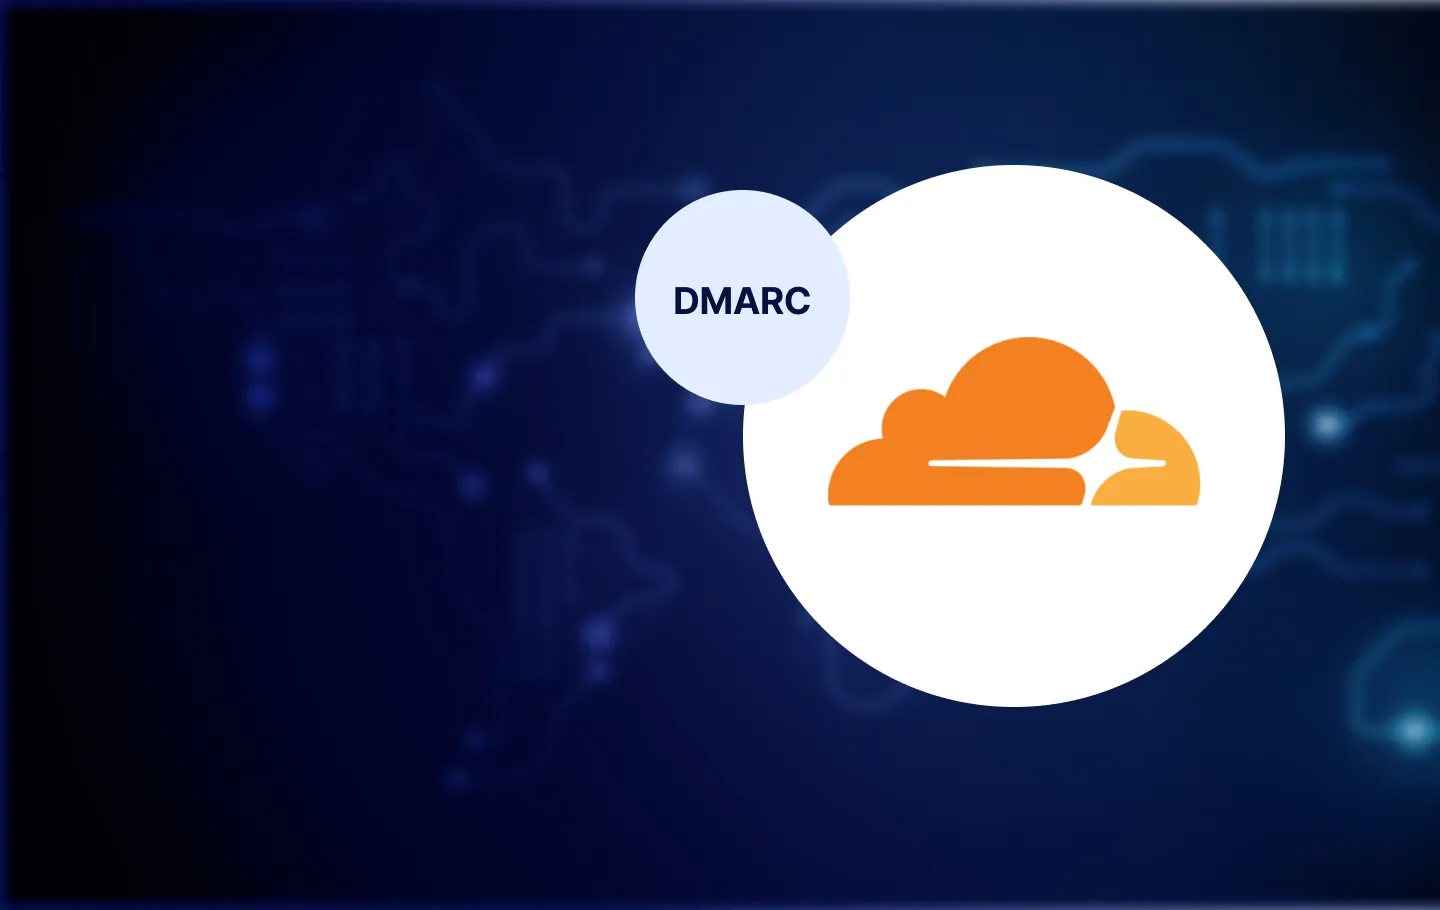 Cloudflare logo and DMARC written on it on a blue background